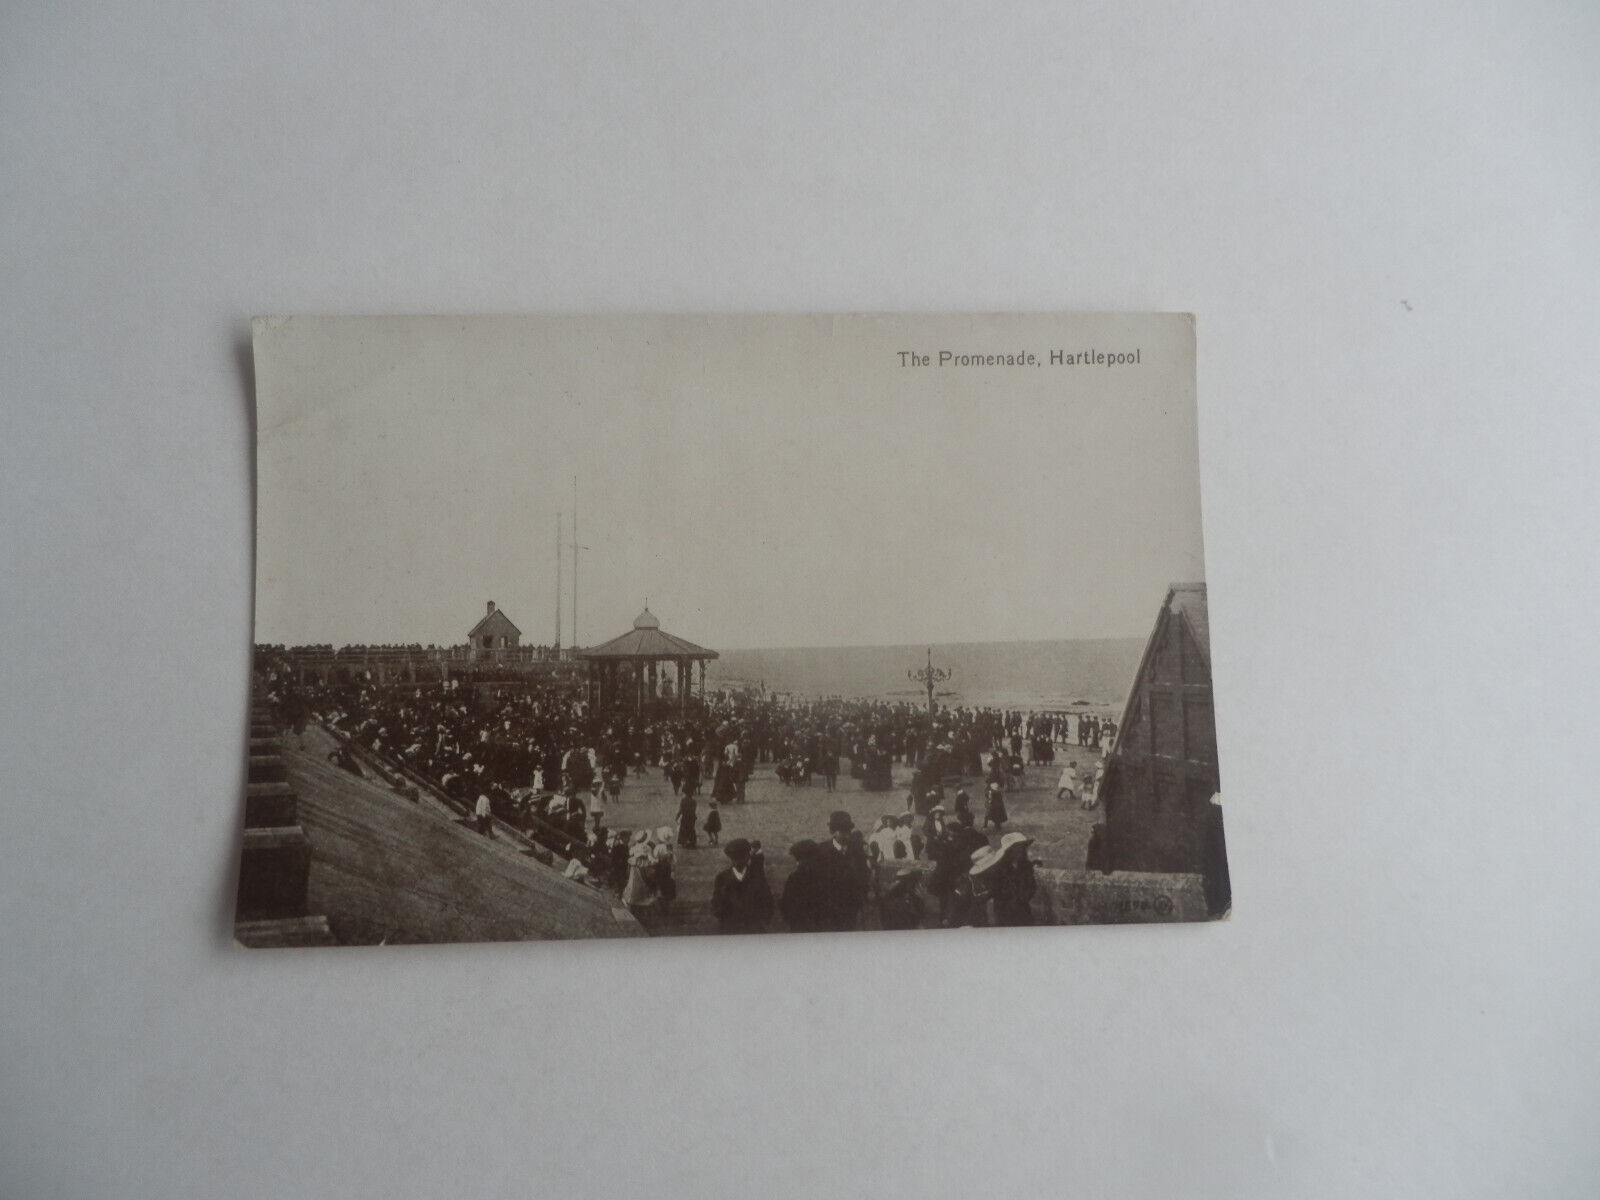 House Clearance - C.!900, POSTCARD, THE PROMENADE, HARTLEPOOL, small creases